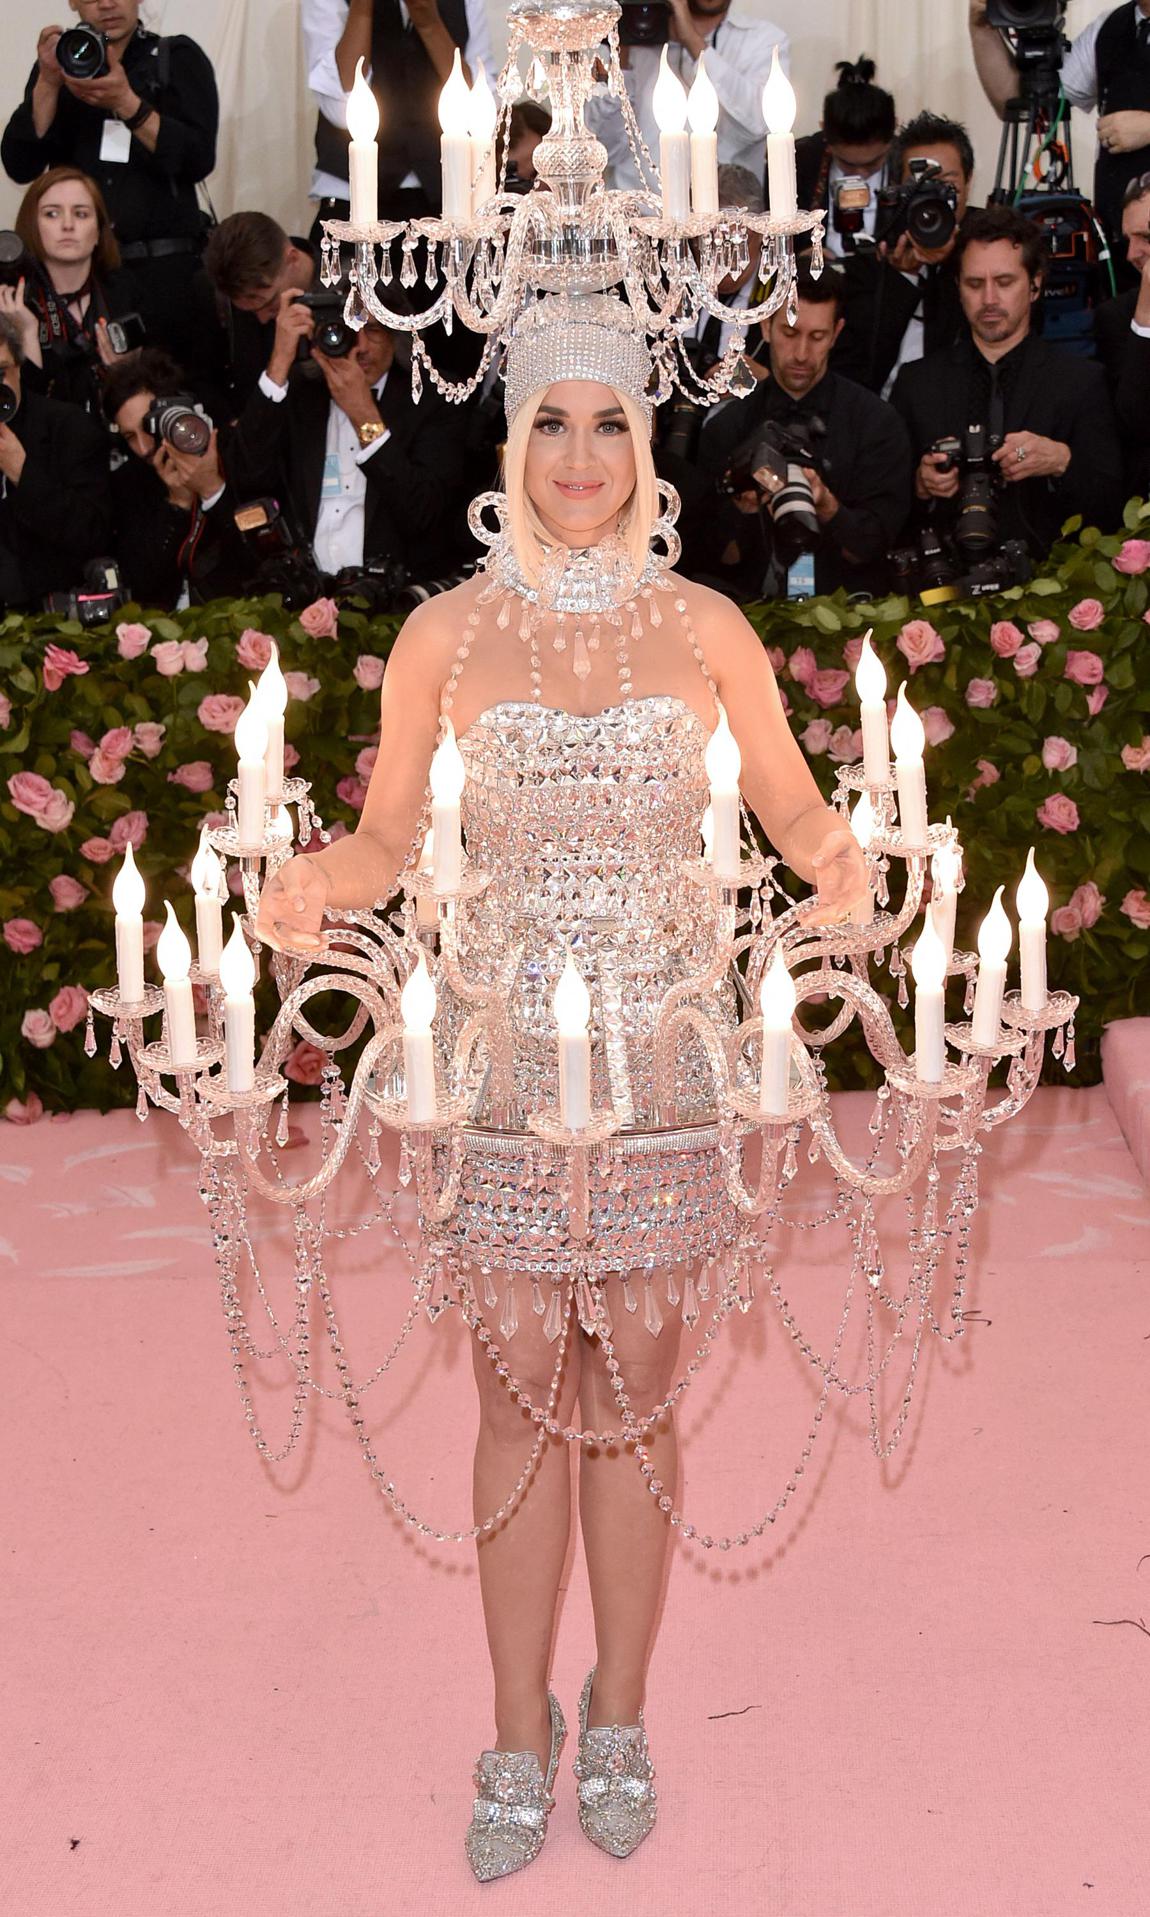 Katy Perry's craziest costumes for Halloween inspiration - Photo 1 How Did The Light Dress Up For The Costume Party